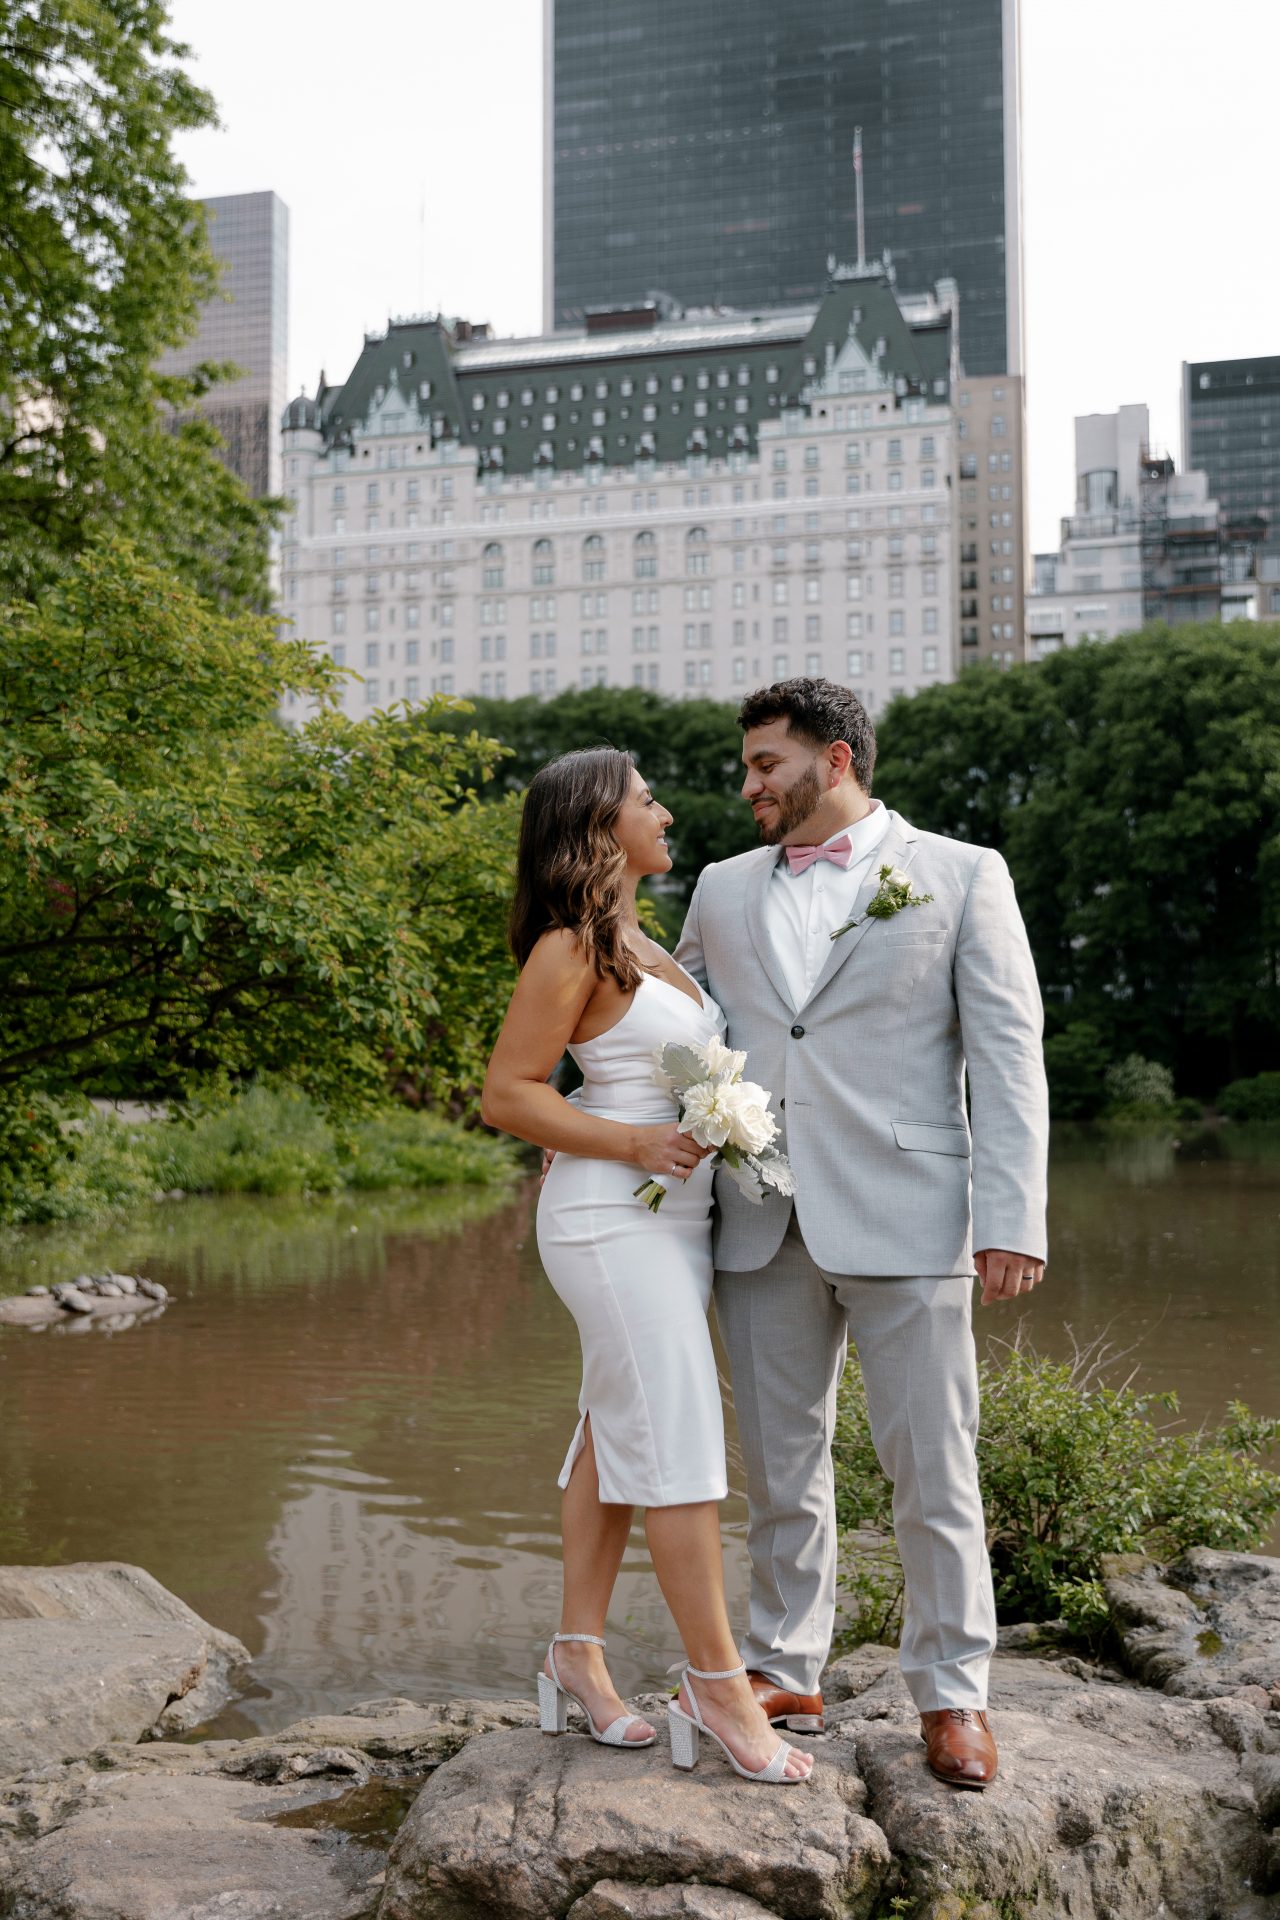 Simple wedding in Central Park NY 25